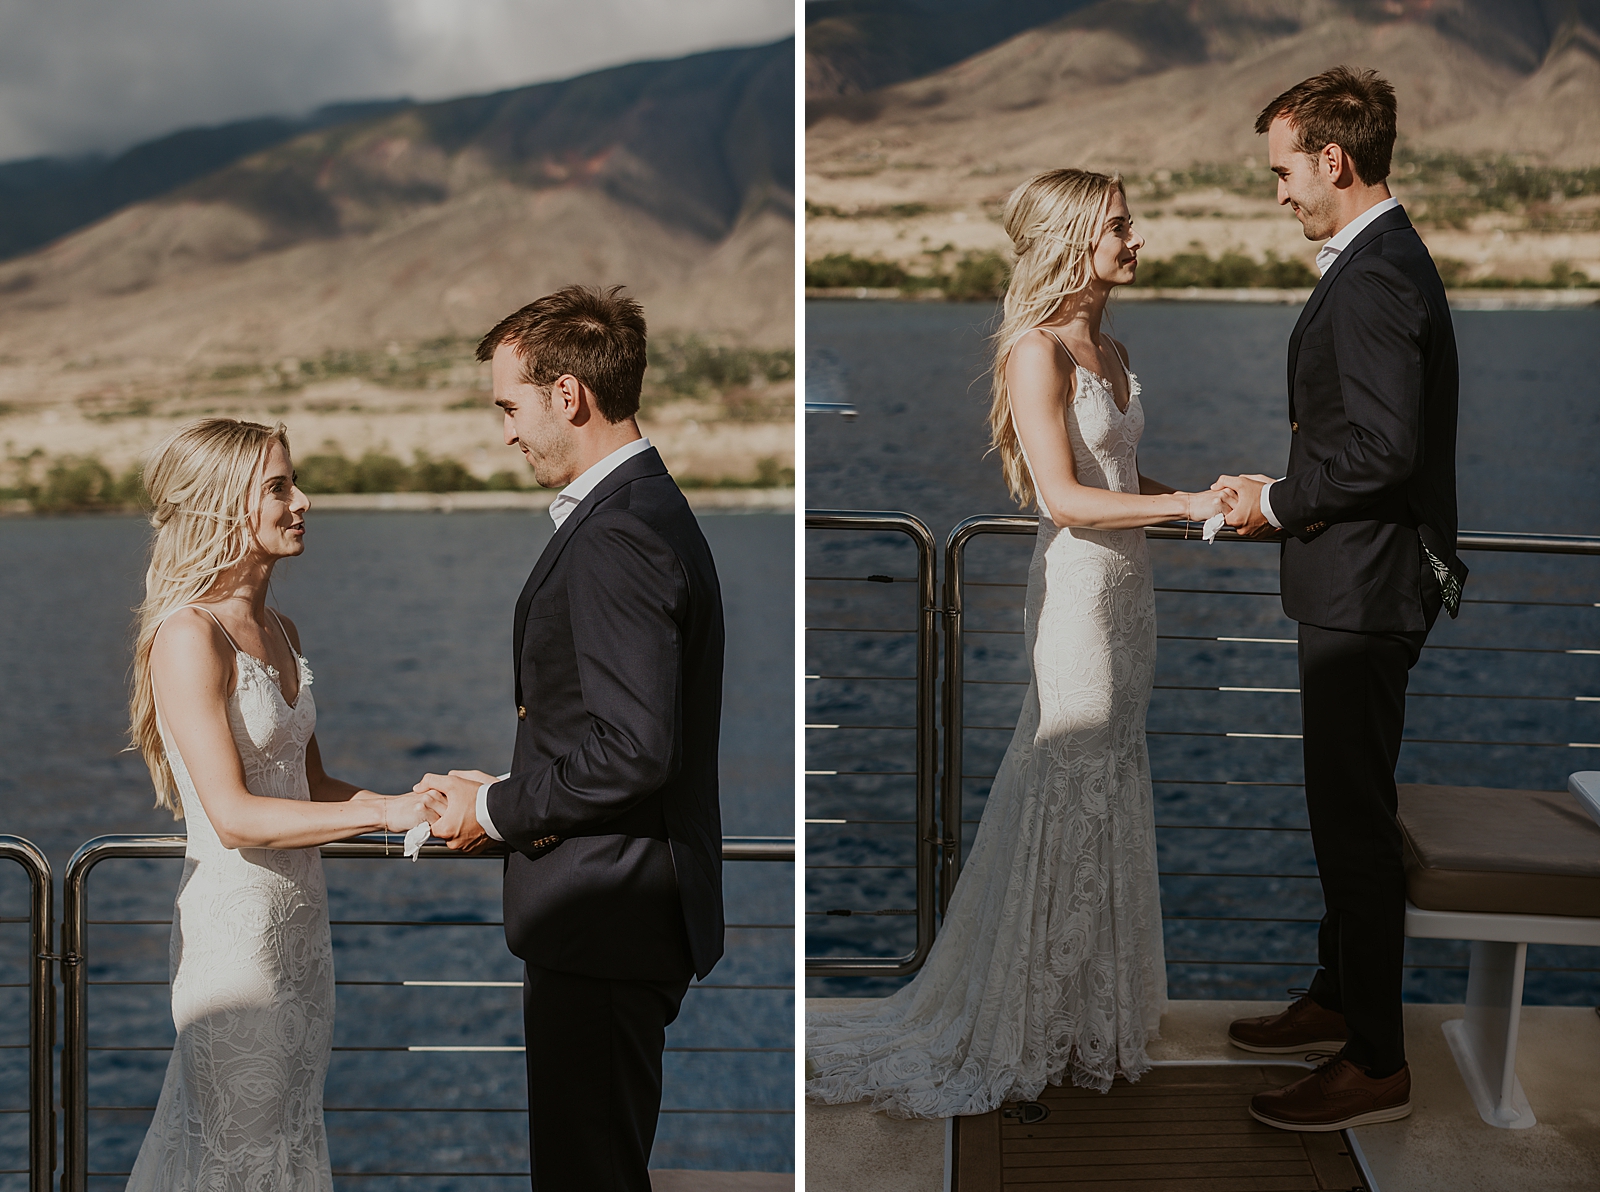 Bride and Groom hand in hand on the boat out on the ocean